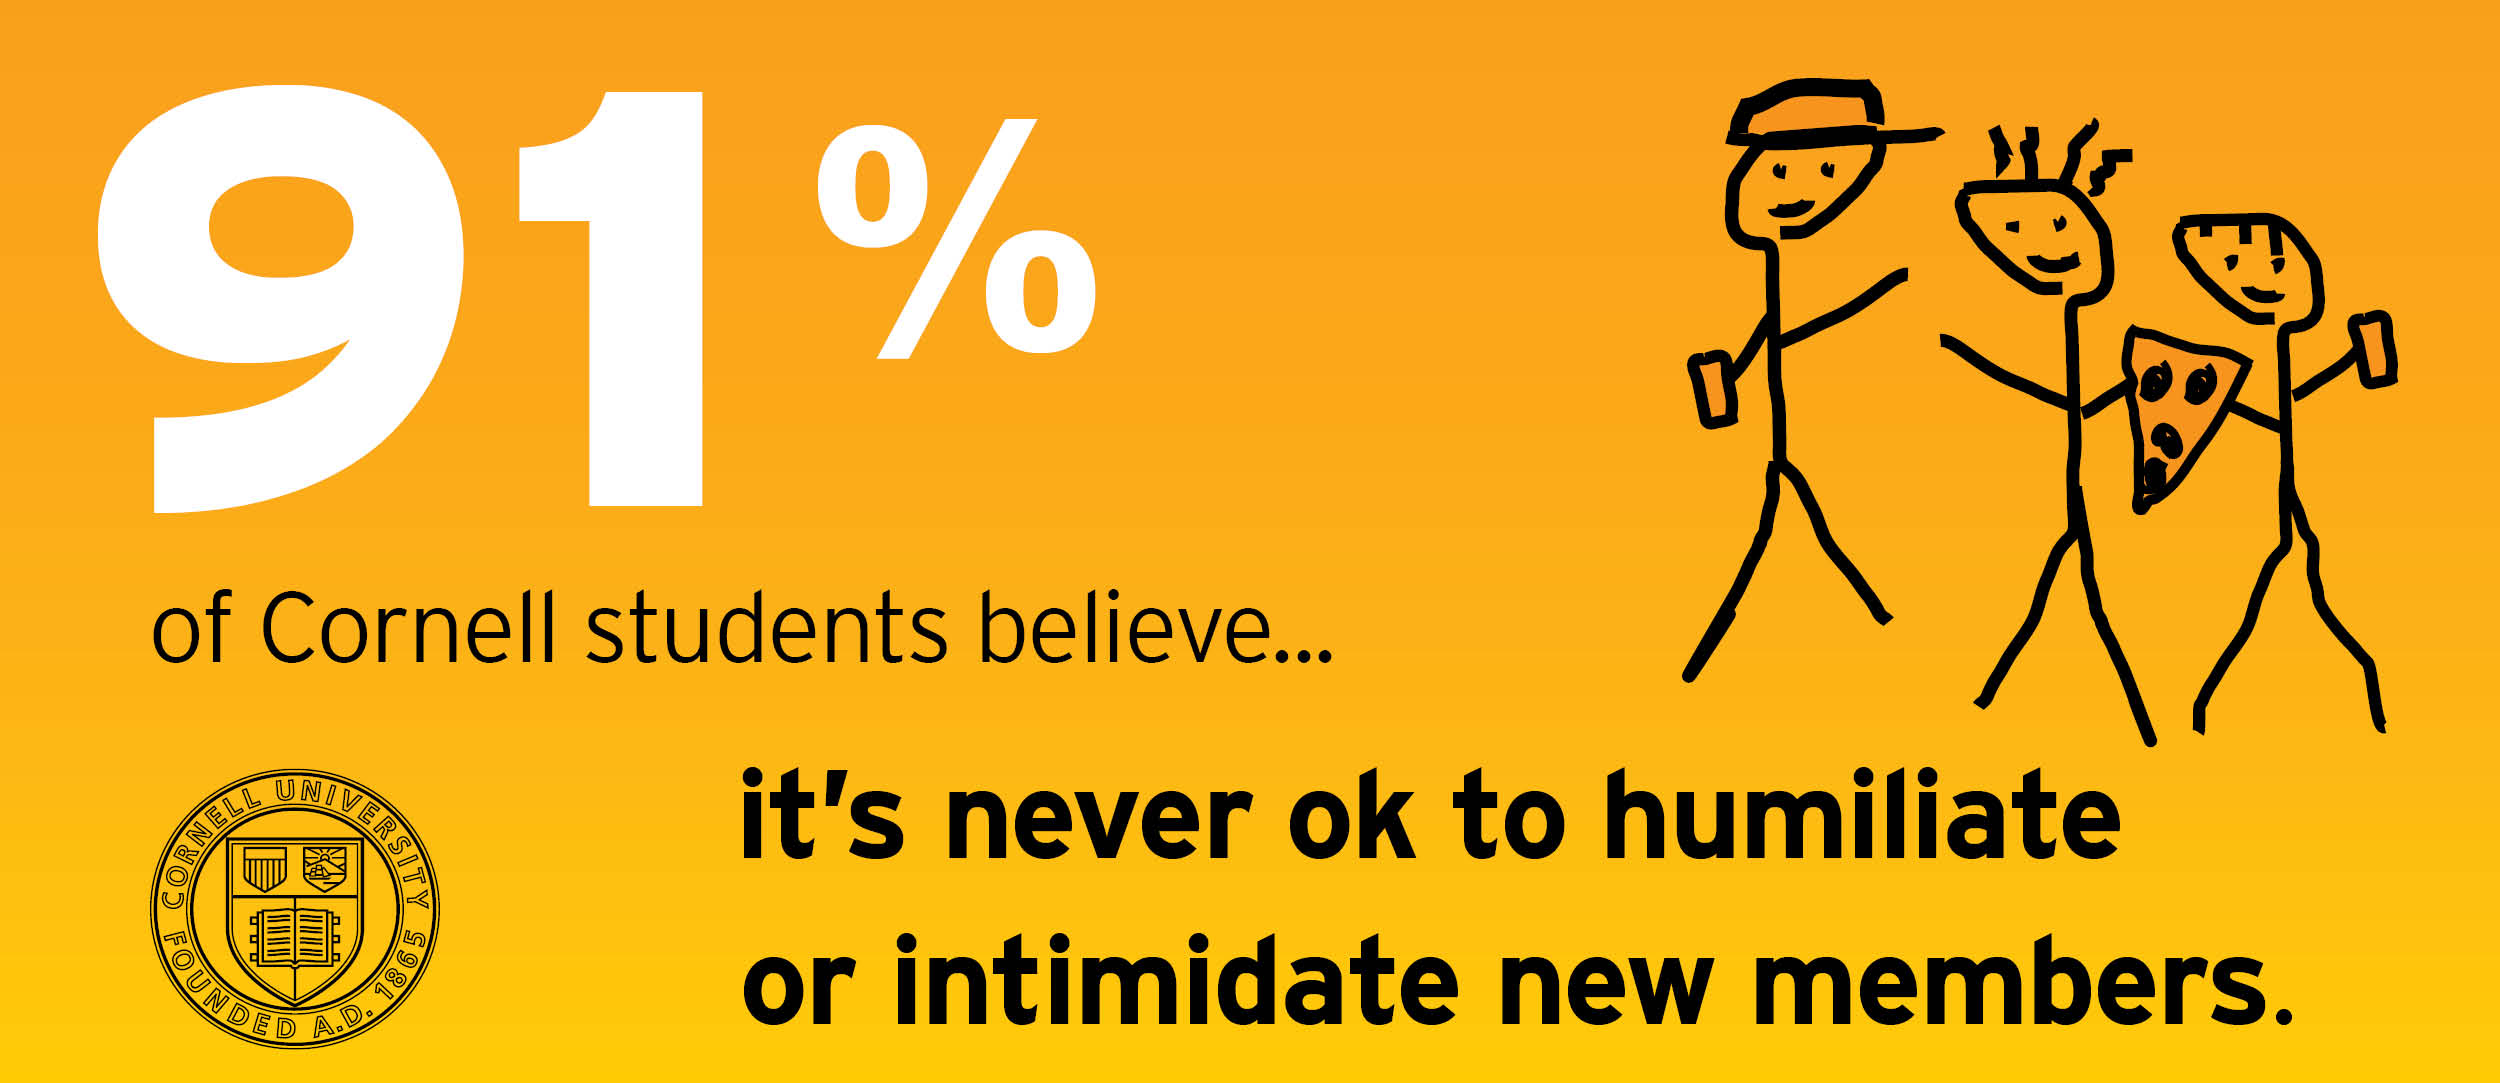 91% of Cornell students say it's never ok to humiliate or intimidate new members